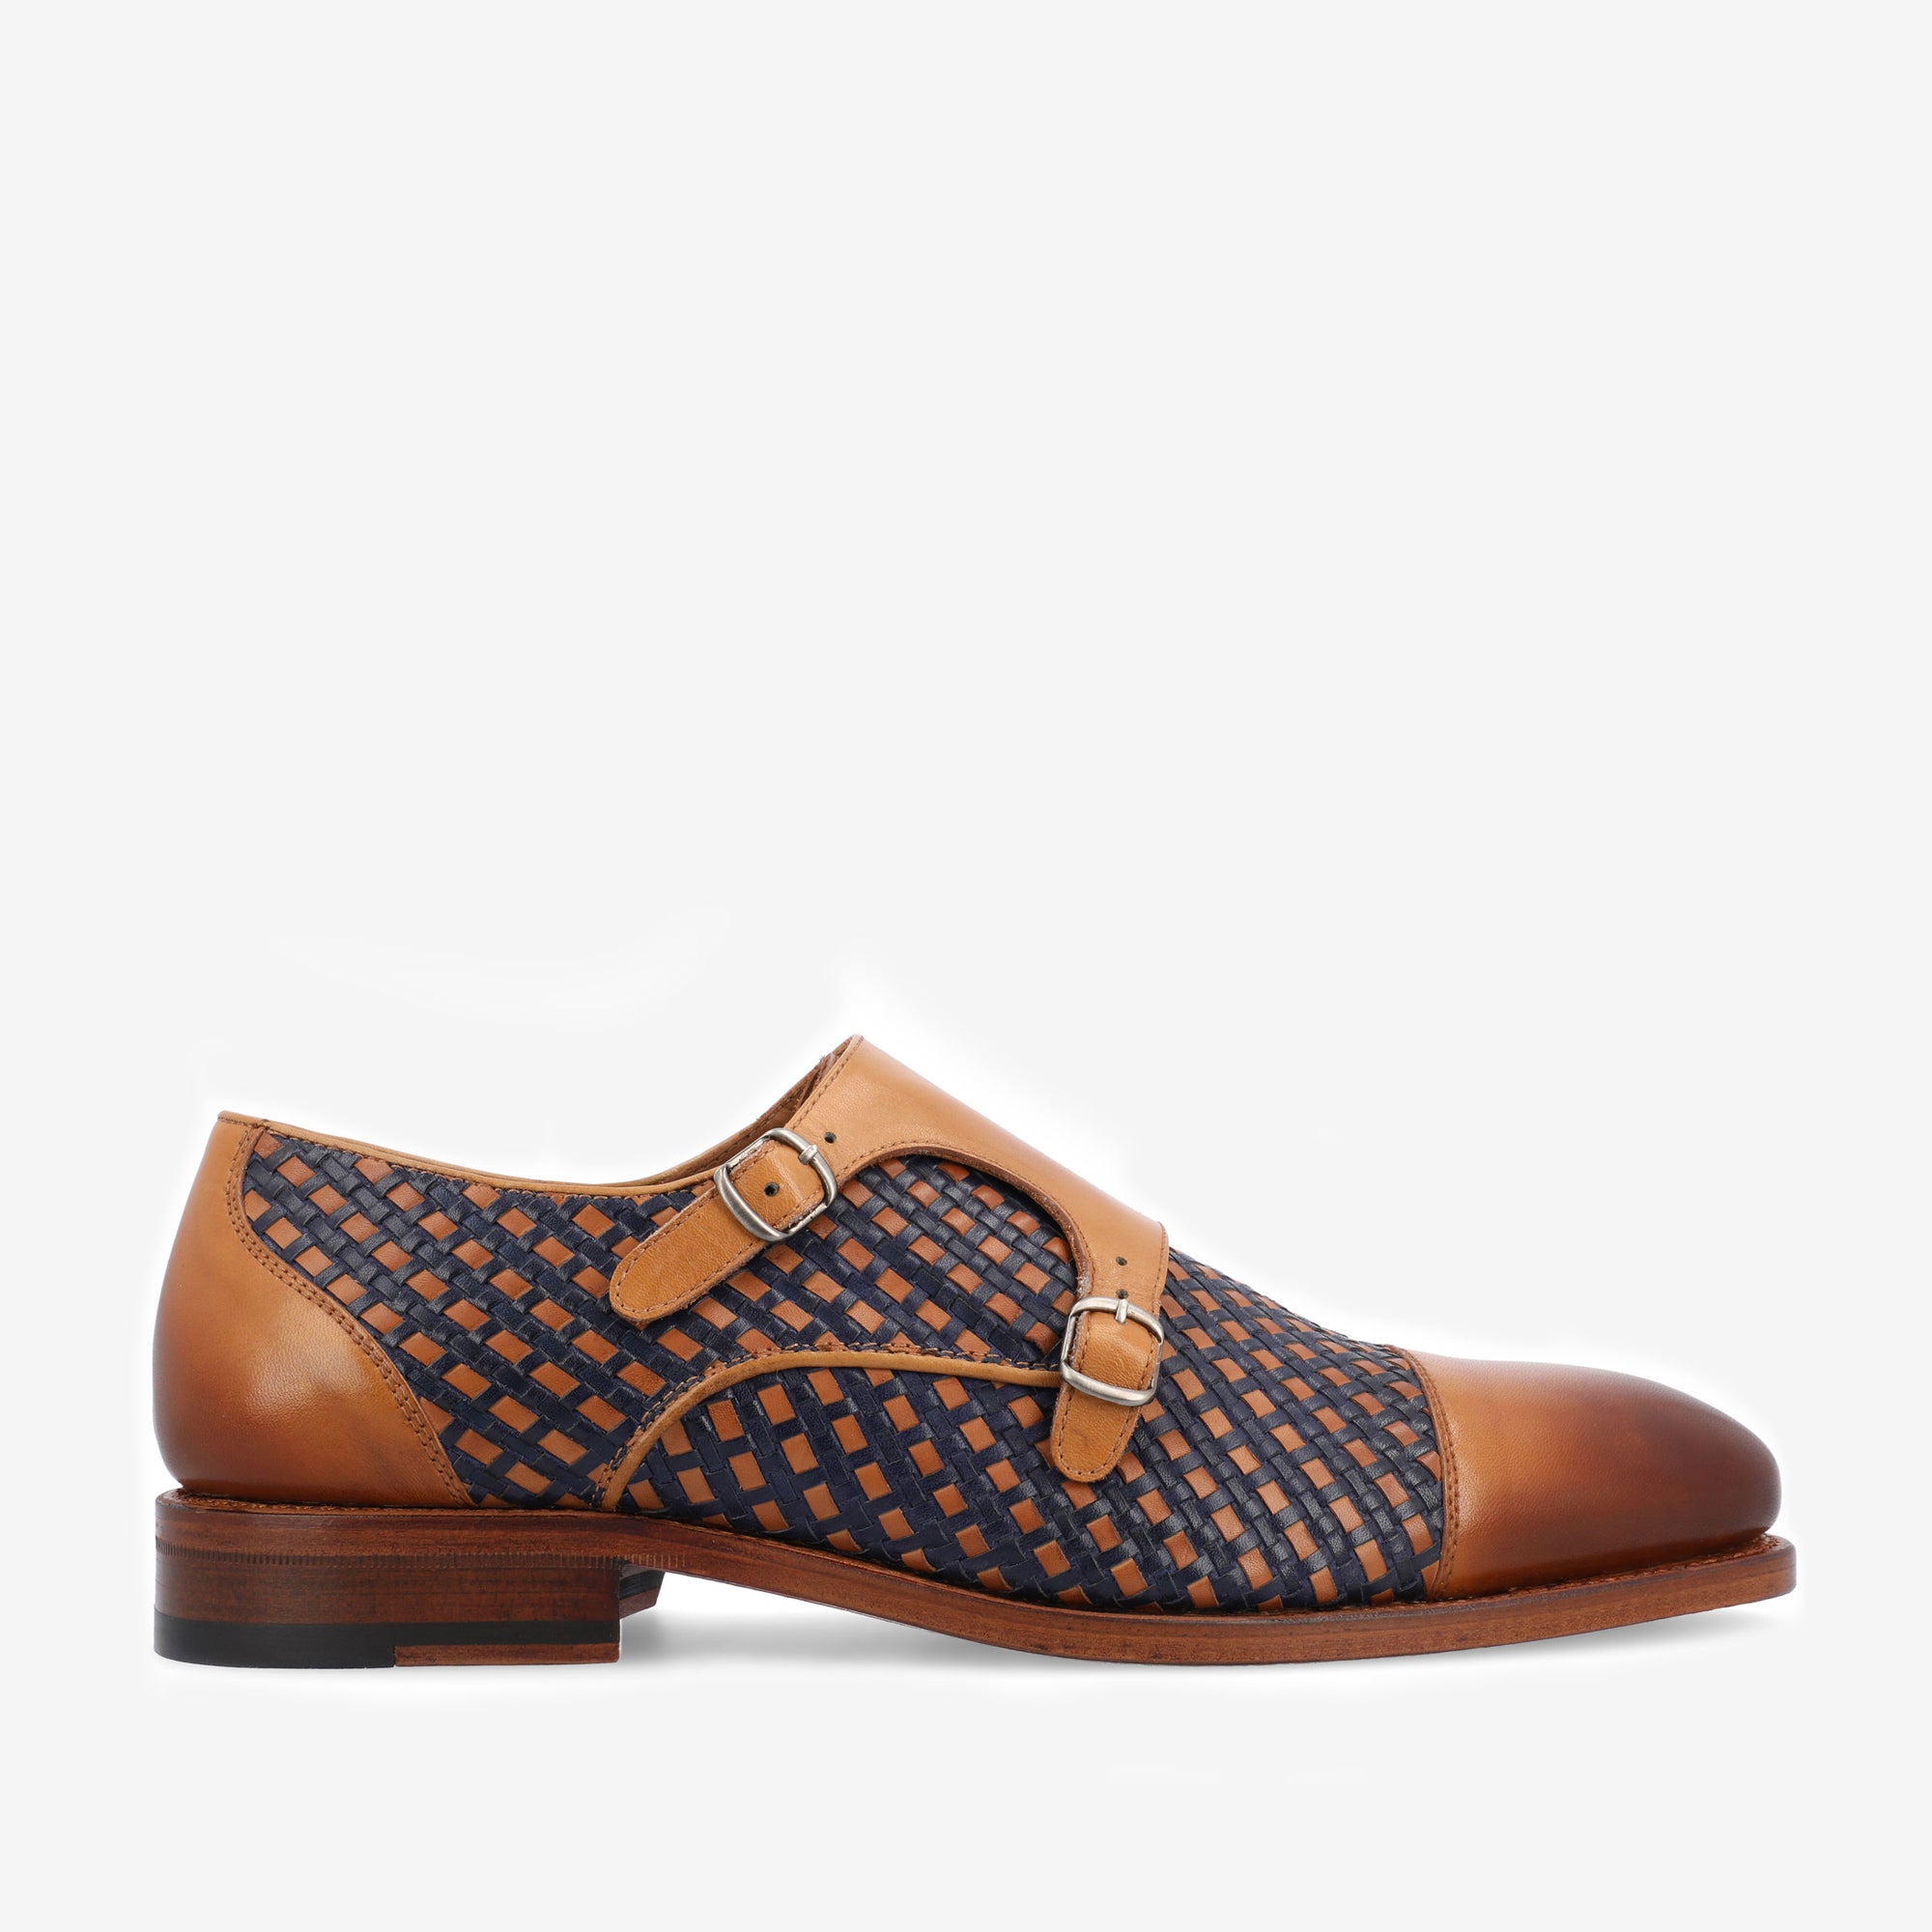 The Lucca Monk Woven in Navy